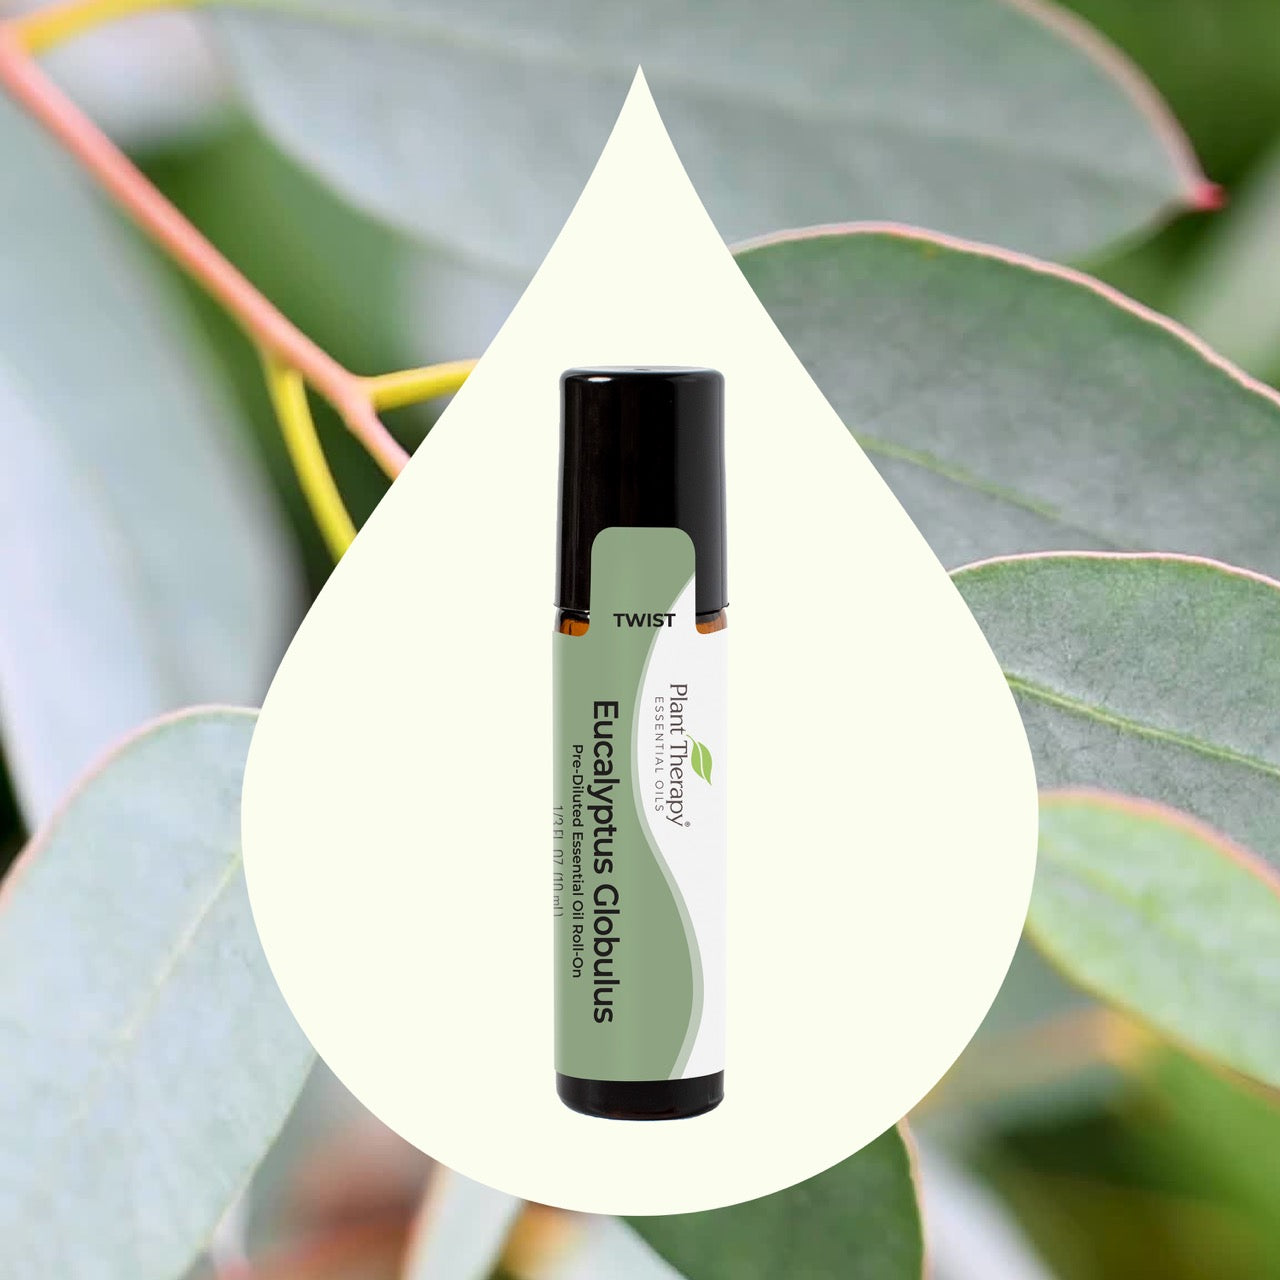 Eucalyptus Globulus Essential Oil Pre-Diluted Roll-On with key ingredient imagery